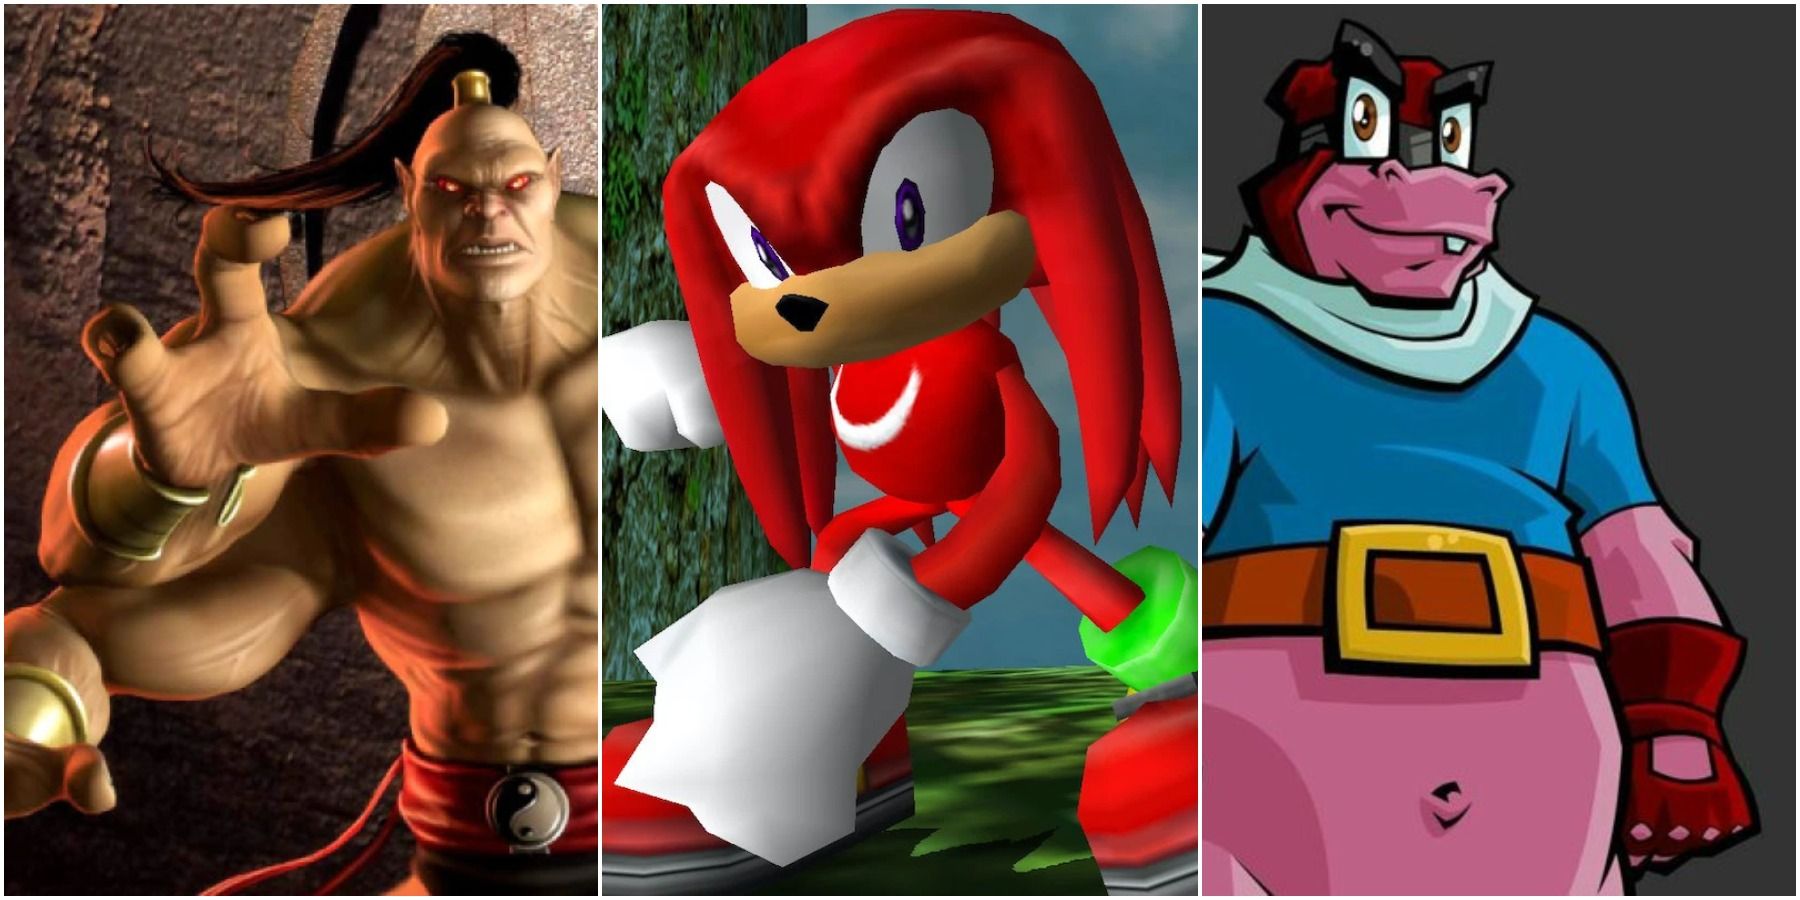 left to right: Goro, Knuckles, Murray